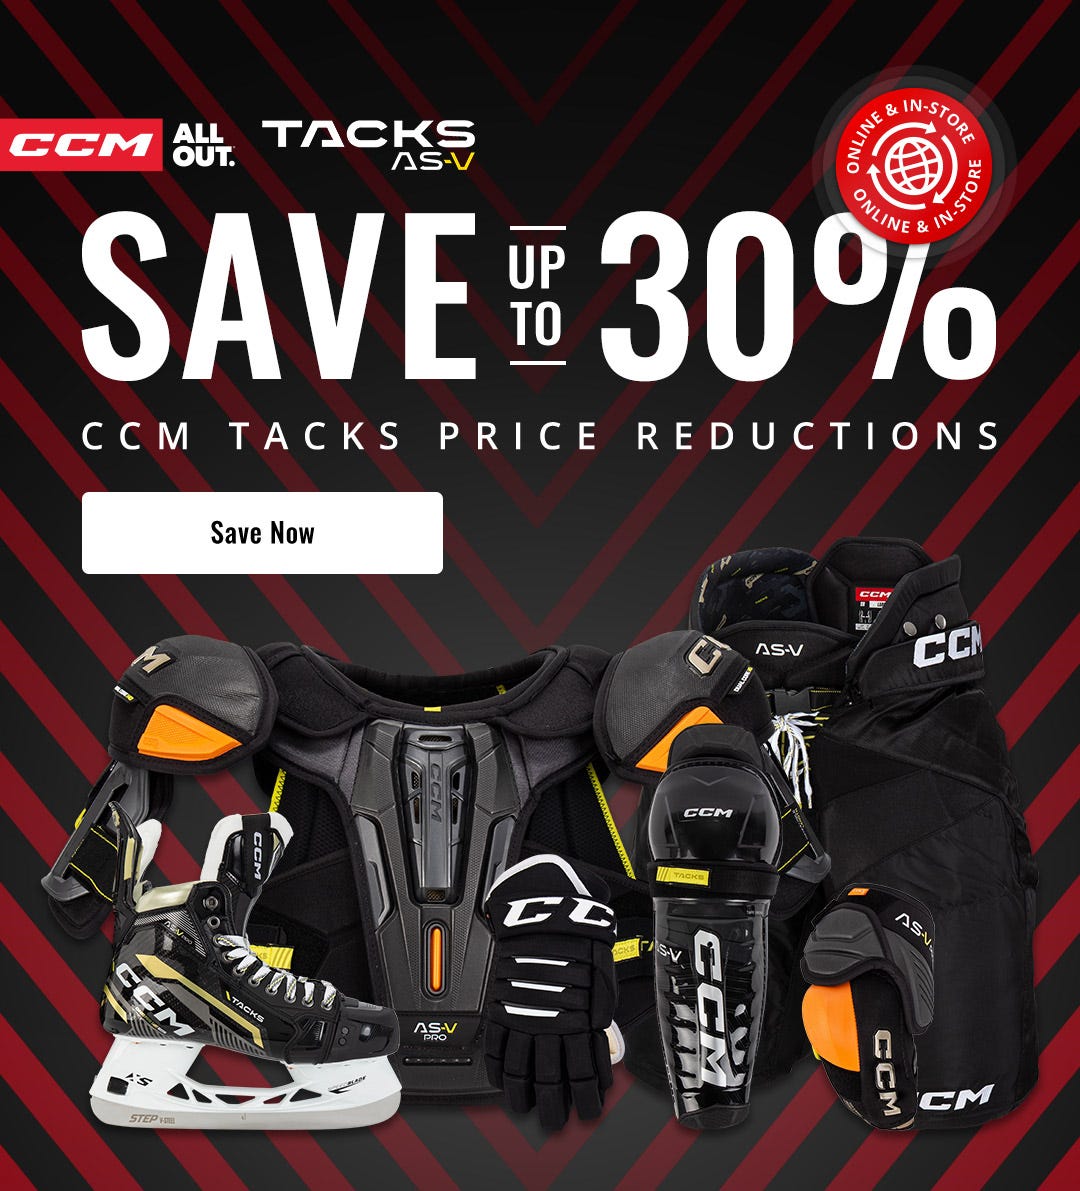 CCM Tacks Price Reductions | Save up to 20%